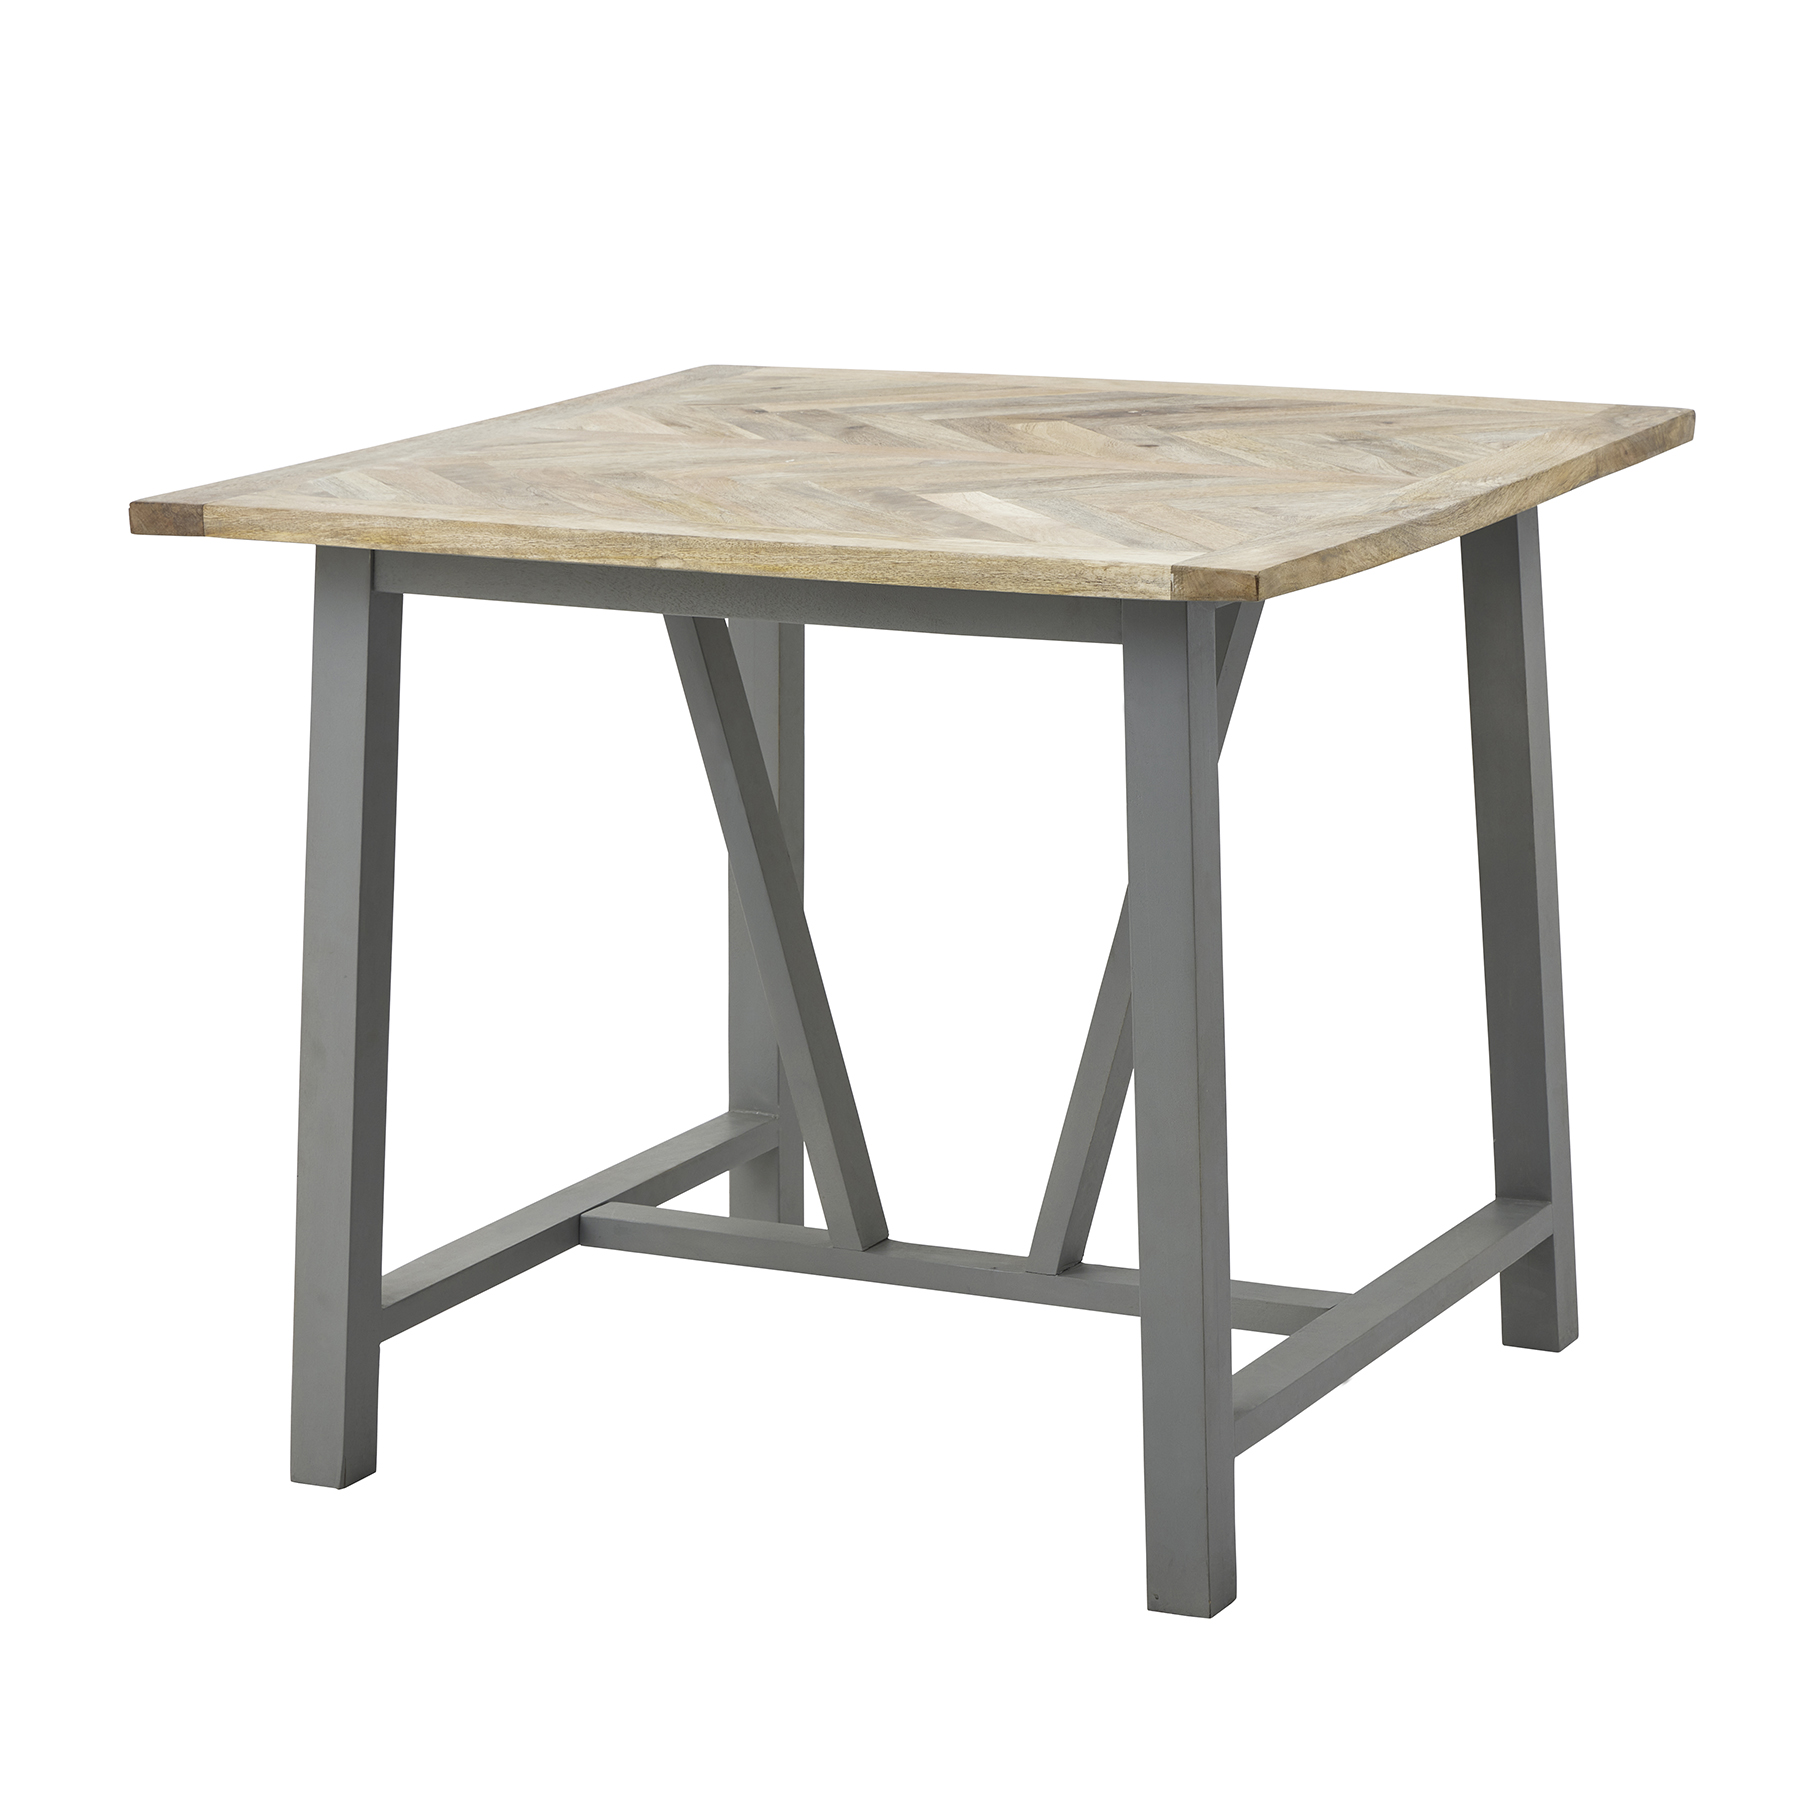 Nordic Grey Collection Square Dining Table - Image 1